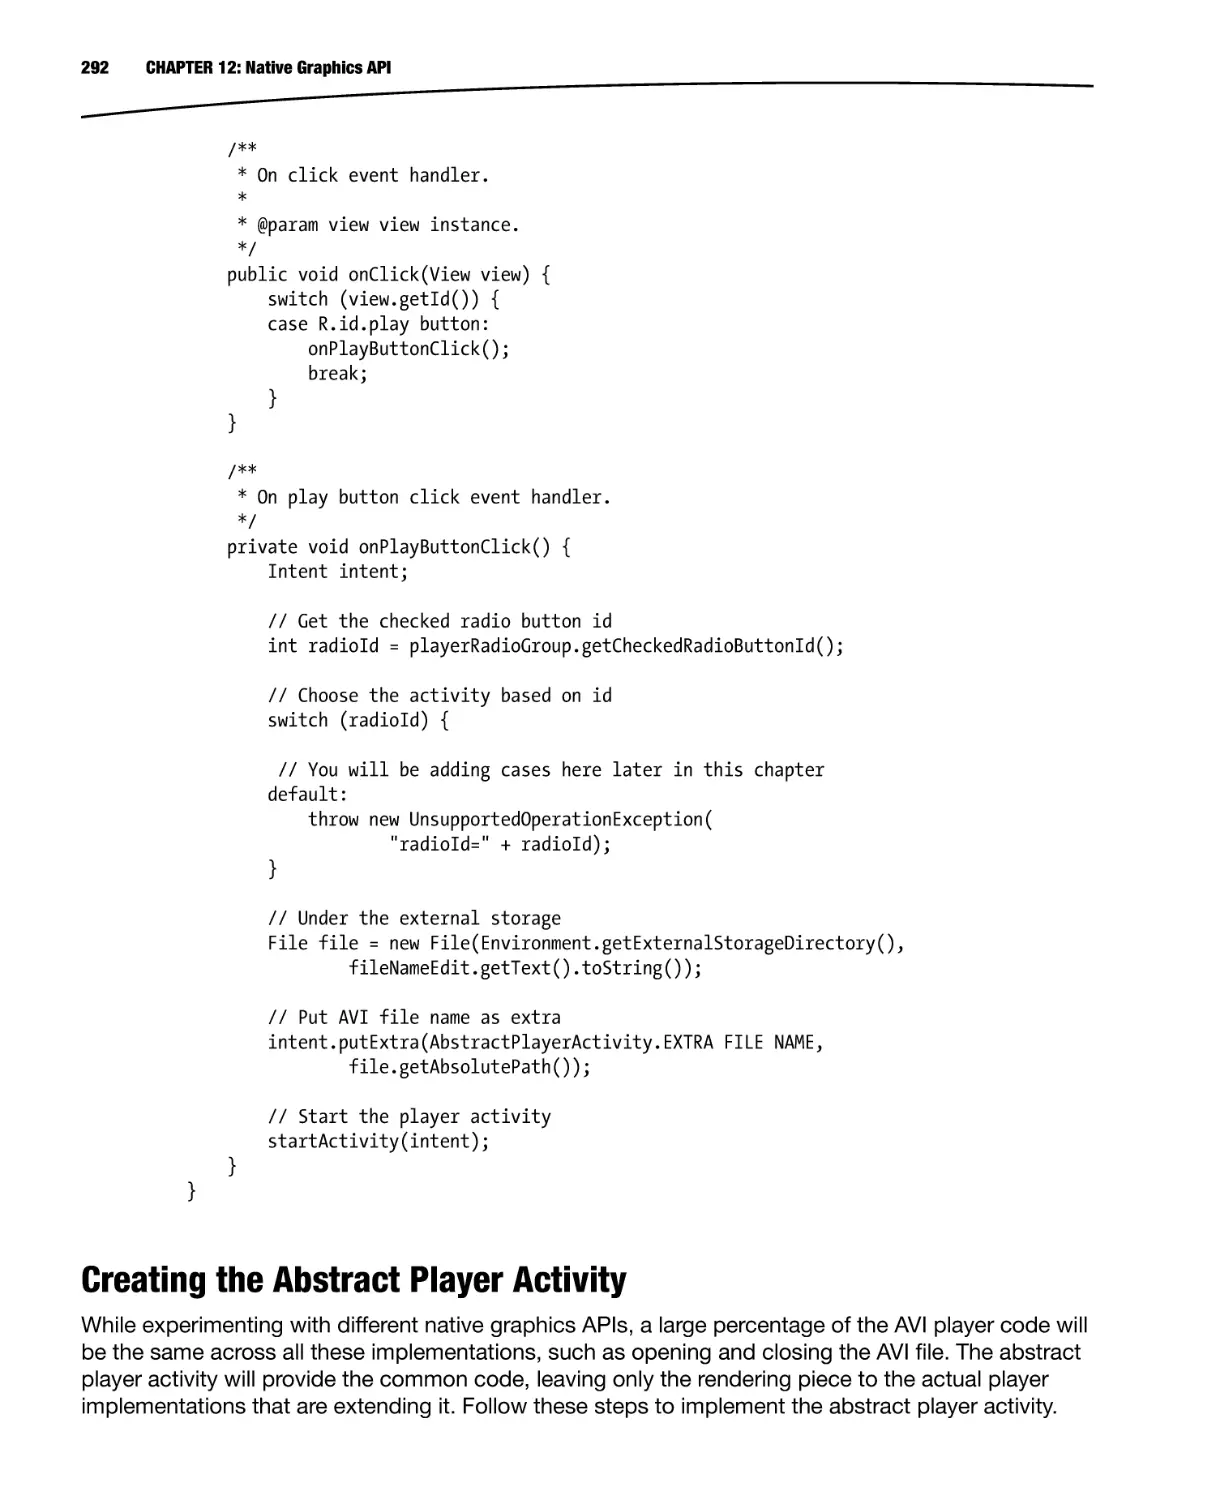 Creating the Abstract Player Activity